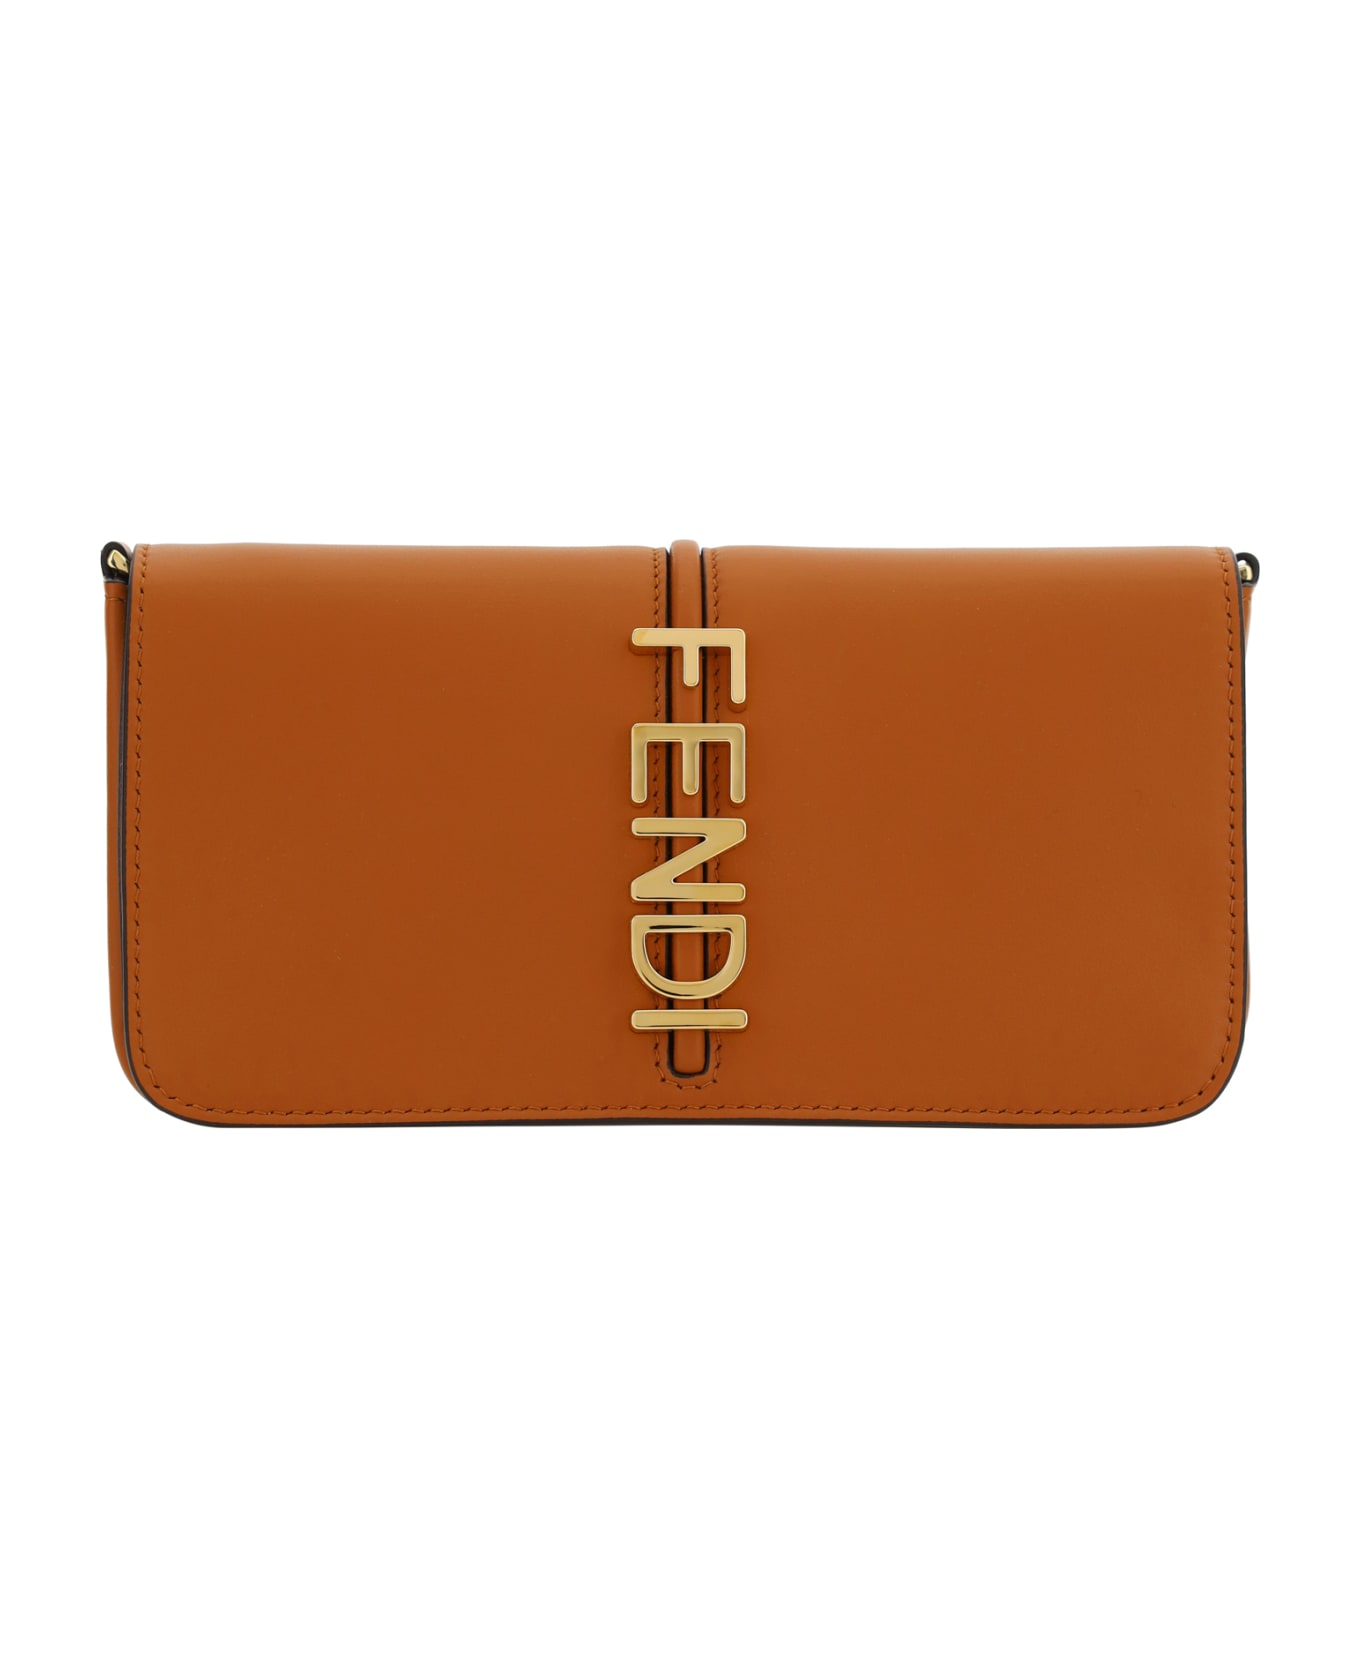 Fendi Wallet With Chain | italist